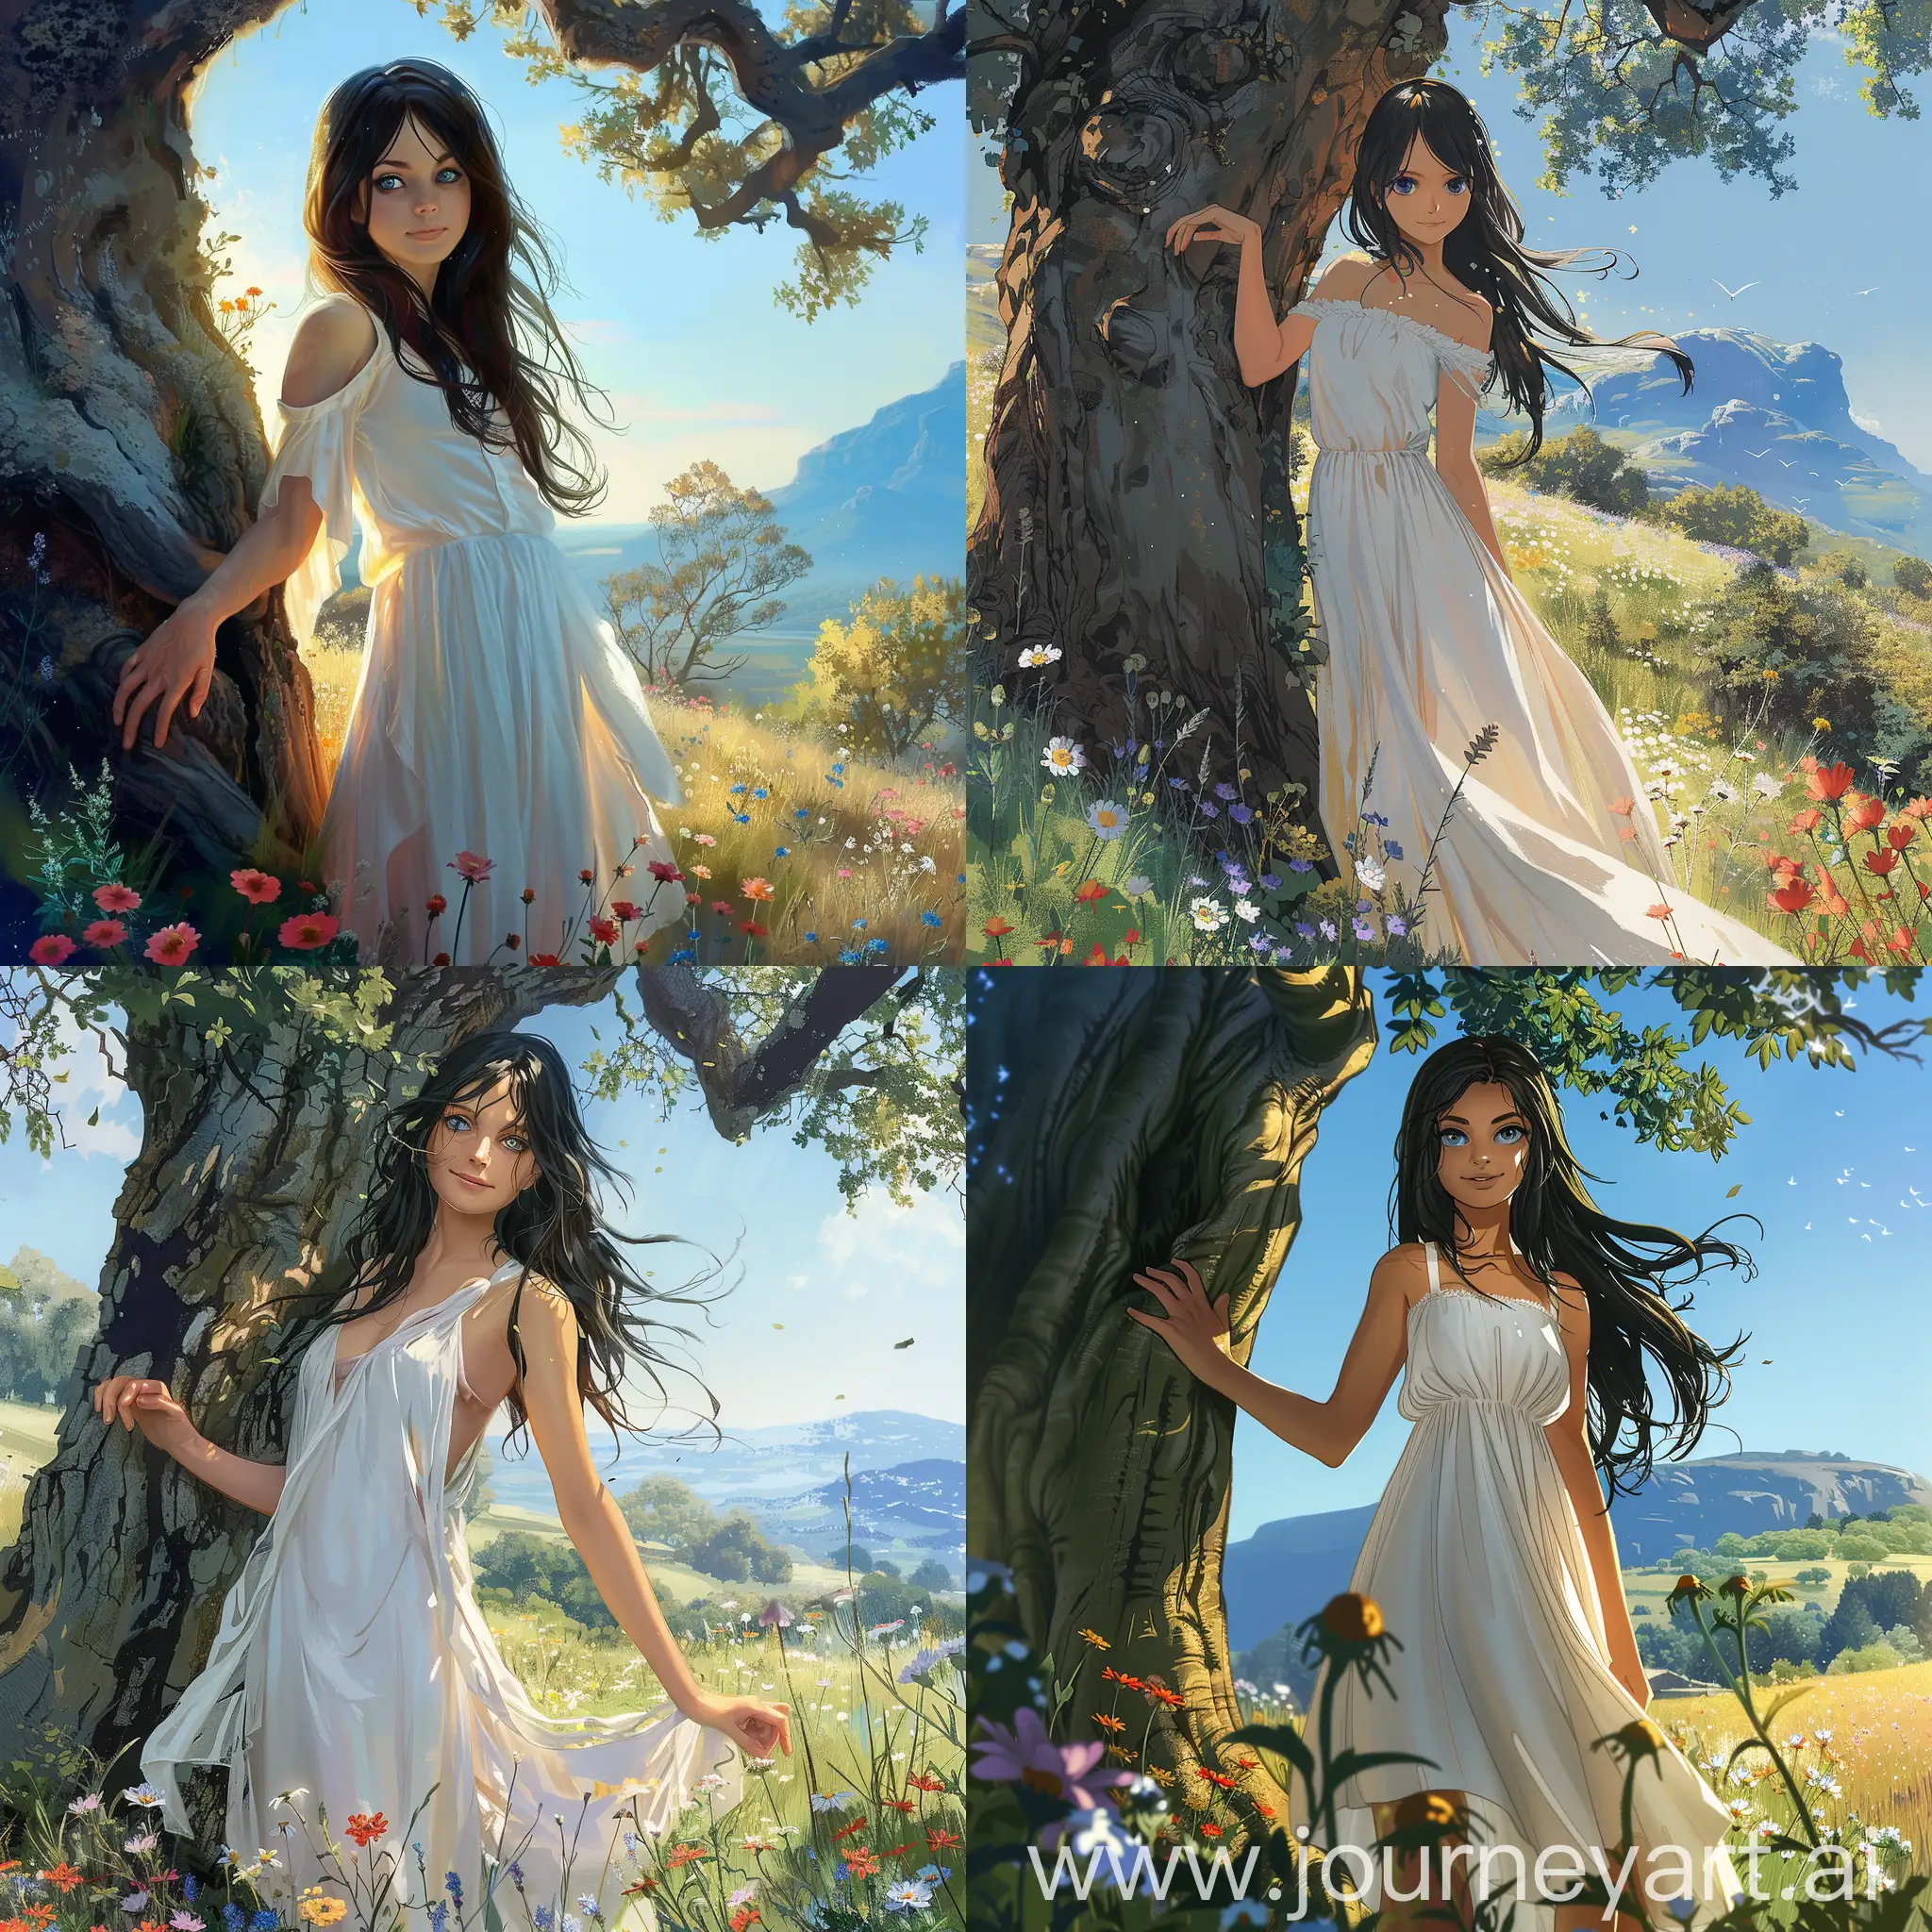 Setting: The girl stands at the edge of a sun-drenched meadow, wildflowers blooming at her feet. A gentle breeze rustles through her hair.

Appearance: She’s wearing a flowing white dress, the fabric catching the sunlight and making it seem like she’s bathed in a golden glow. Her hair is long and dark, cascading down her back like a waterfall. Her eyes are a deep, captivating blue, and her smile is warm and inviting.

Details: Her hand rests lightly on the trunk of an ancient oak tree, its gnarled bark a testament to the passage of time. In the distance, a mountain range rises up against a clear blue sky, its peaks touched with a hint of snow. The air is filled with the scent of wildflowers and the sound of birdsong.

Mood: The overall mood is one of serene beauty and quiet strength. The girl appears both fragile and powerful, a delicate blossom with an unyielding spirit.